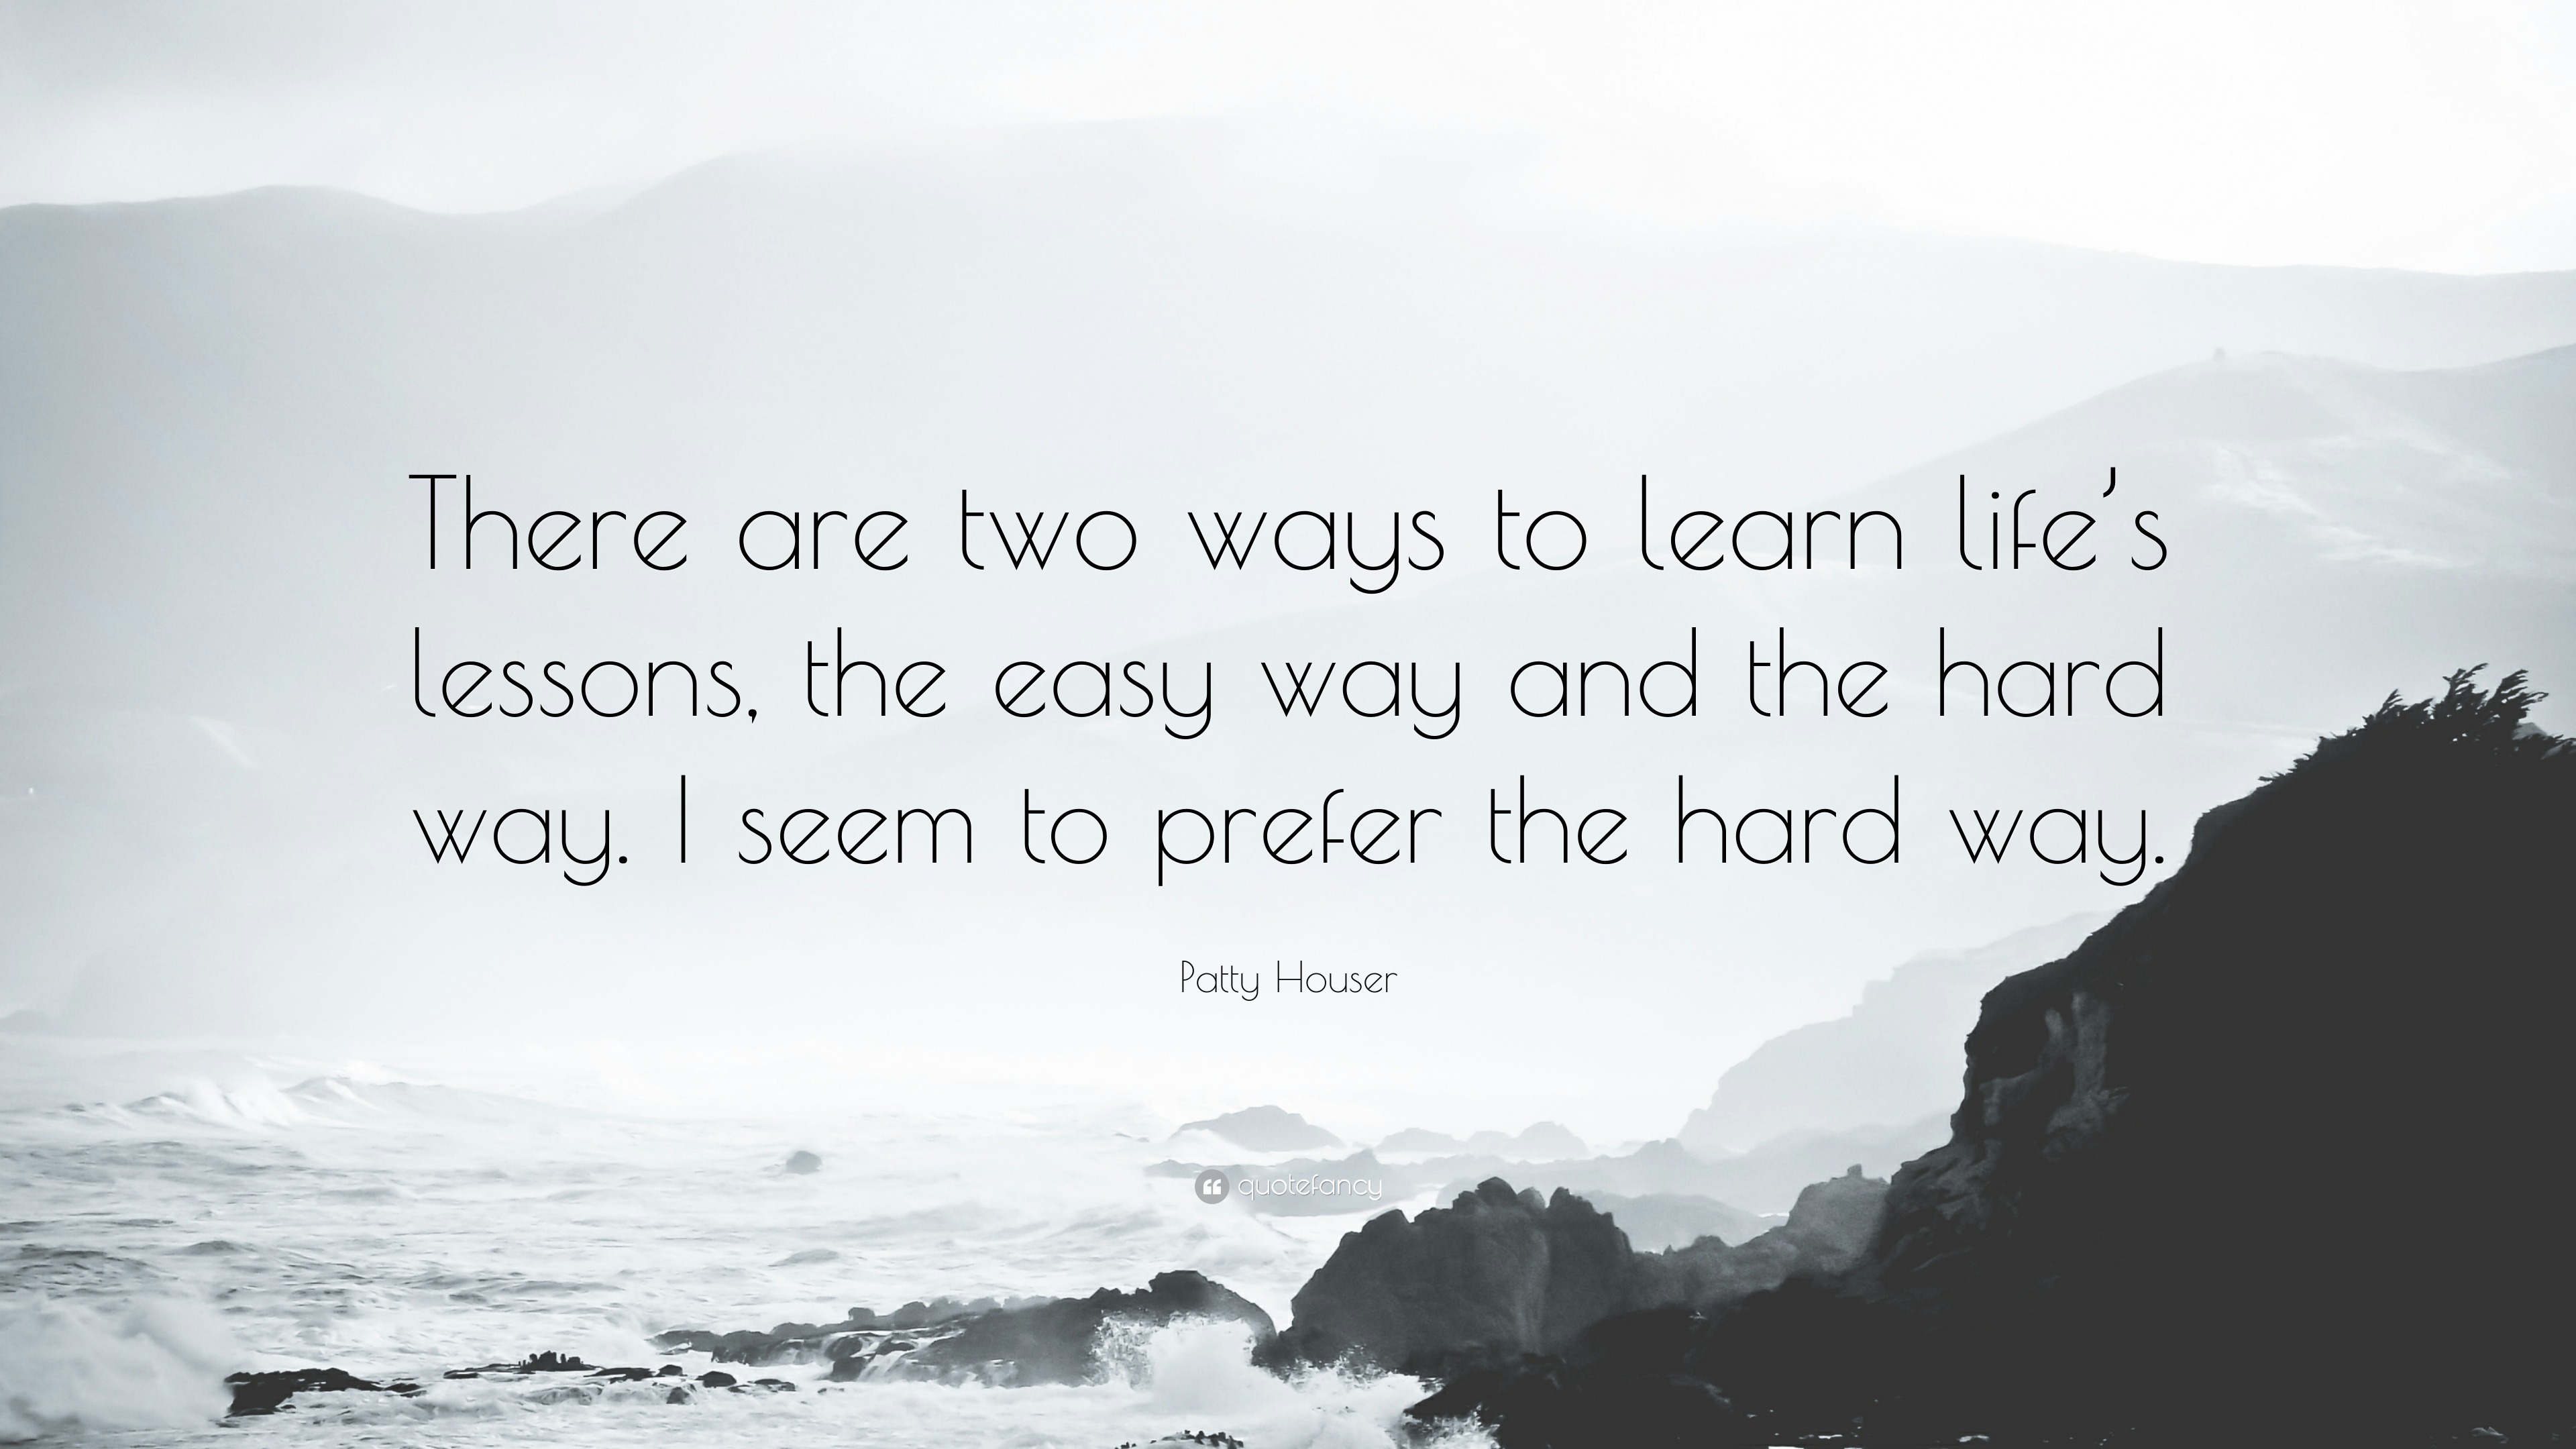 Patty Houser Quote: “There are two ways to learn life's lessons